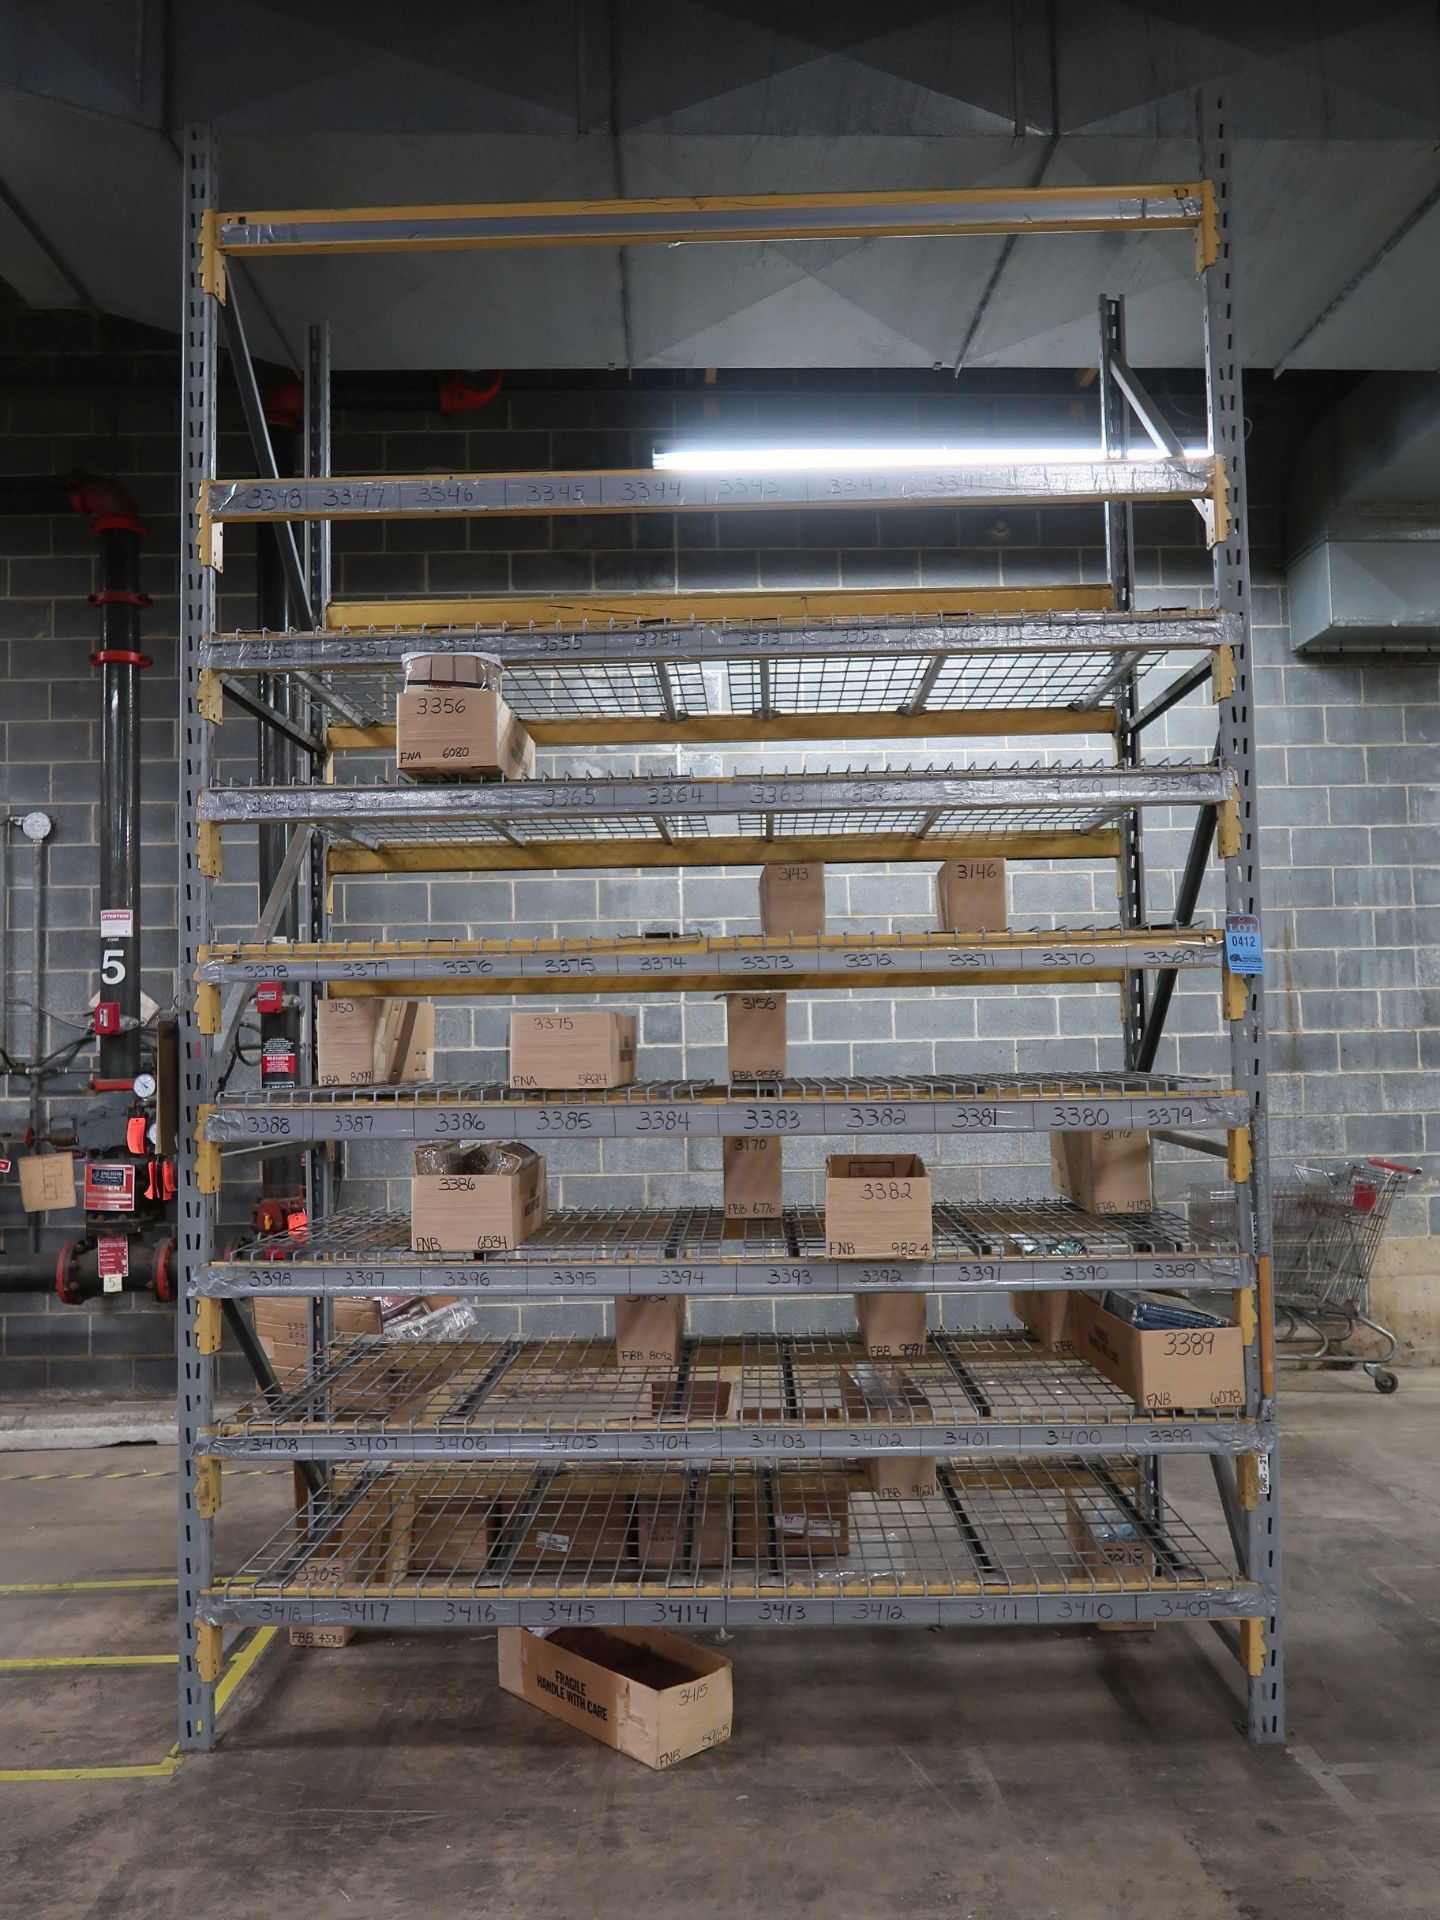 SECTION 96" X 42" X 156" ADJUSTABLE BEAM PALLET RACK; (2) 42" X 156" UPRIGHTS, (17) 96"